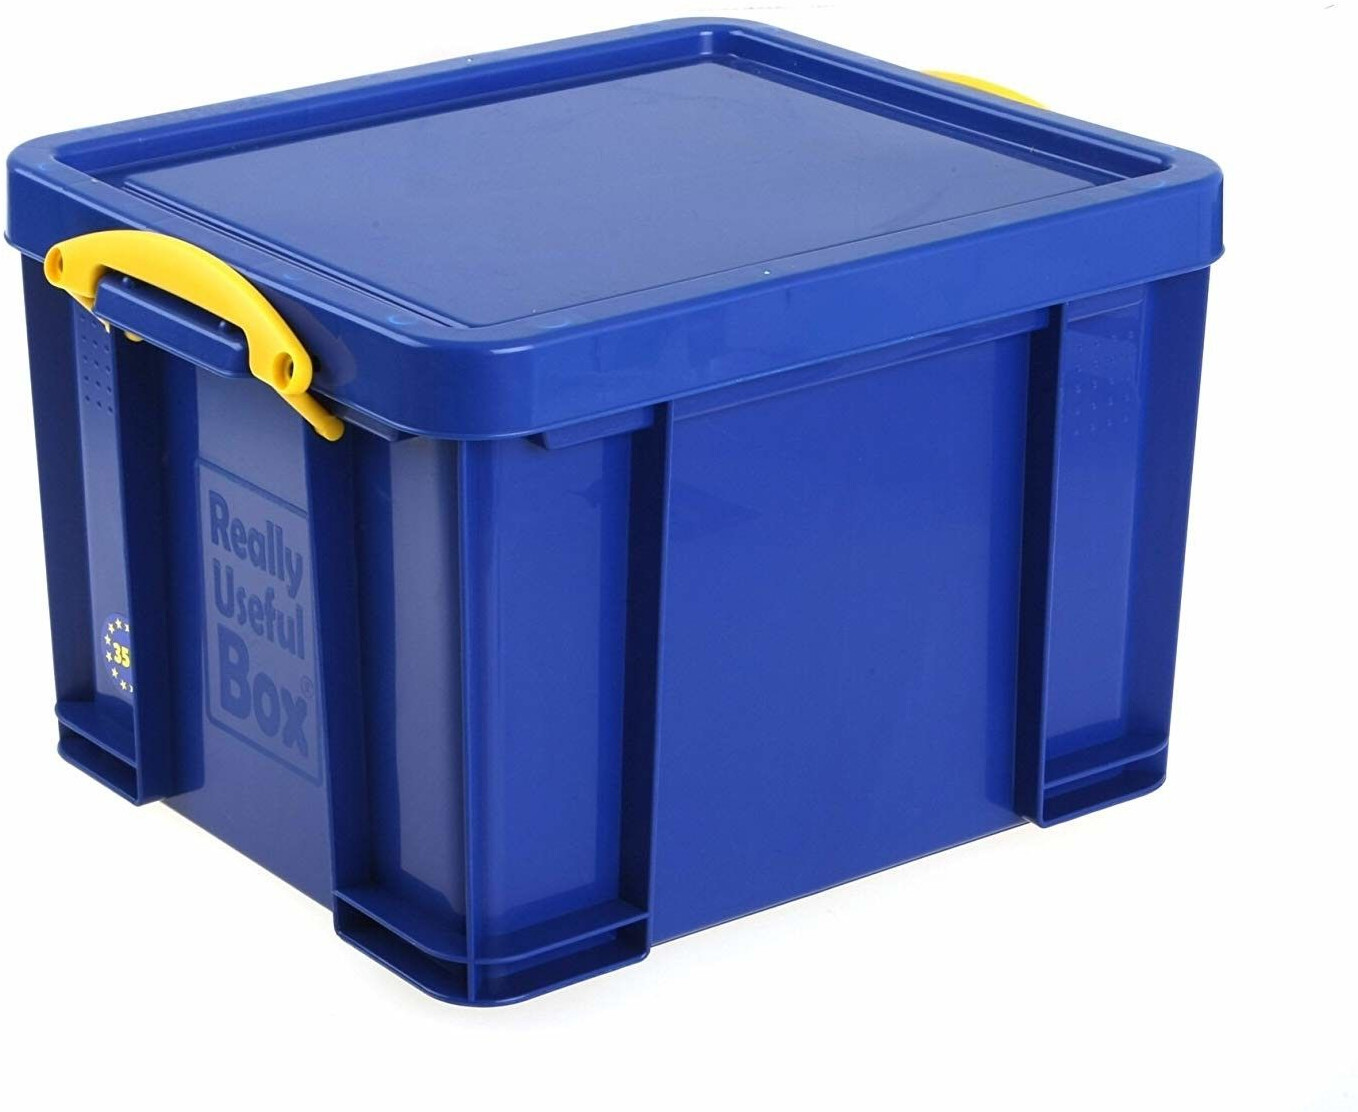 Photos - Clothes Drawer Organiser Really Useful Products Really Useful Products Storage Box 35 L Blue